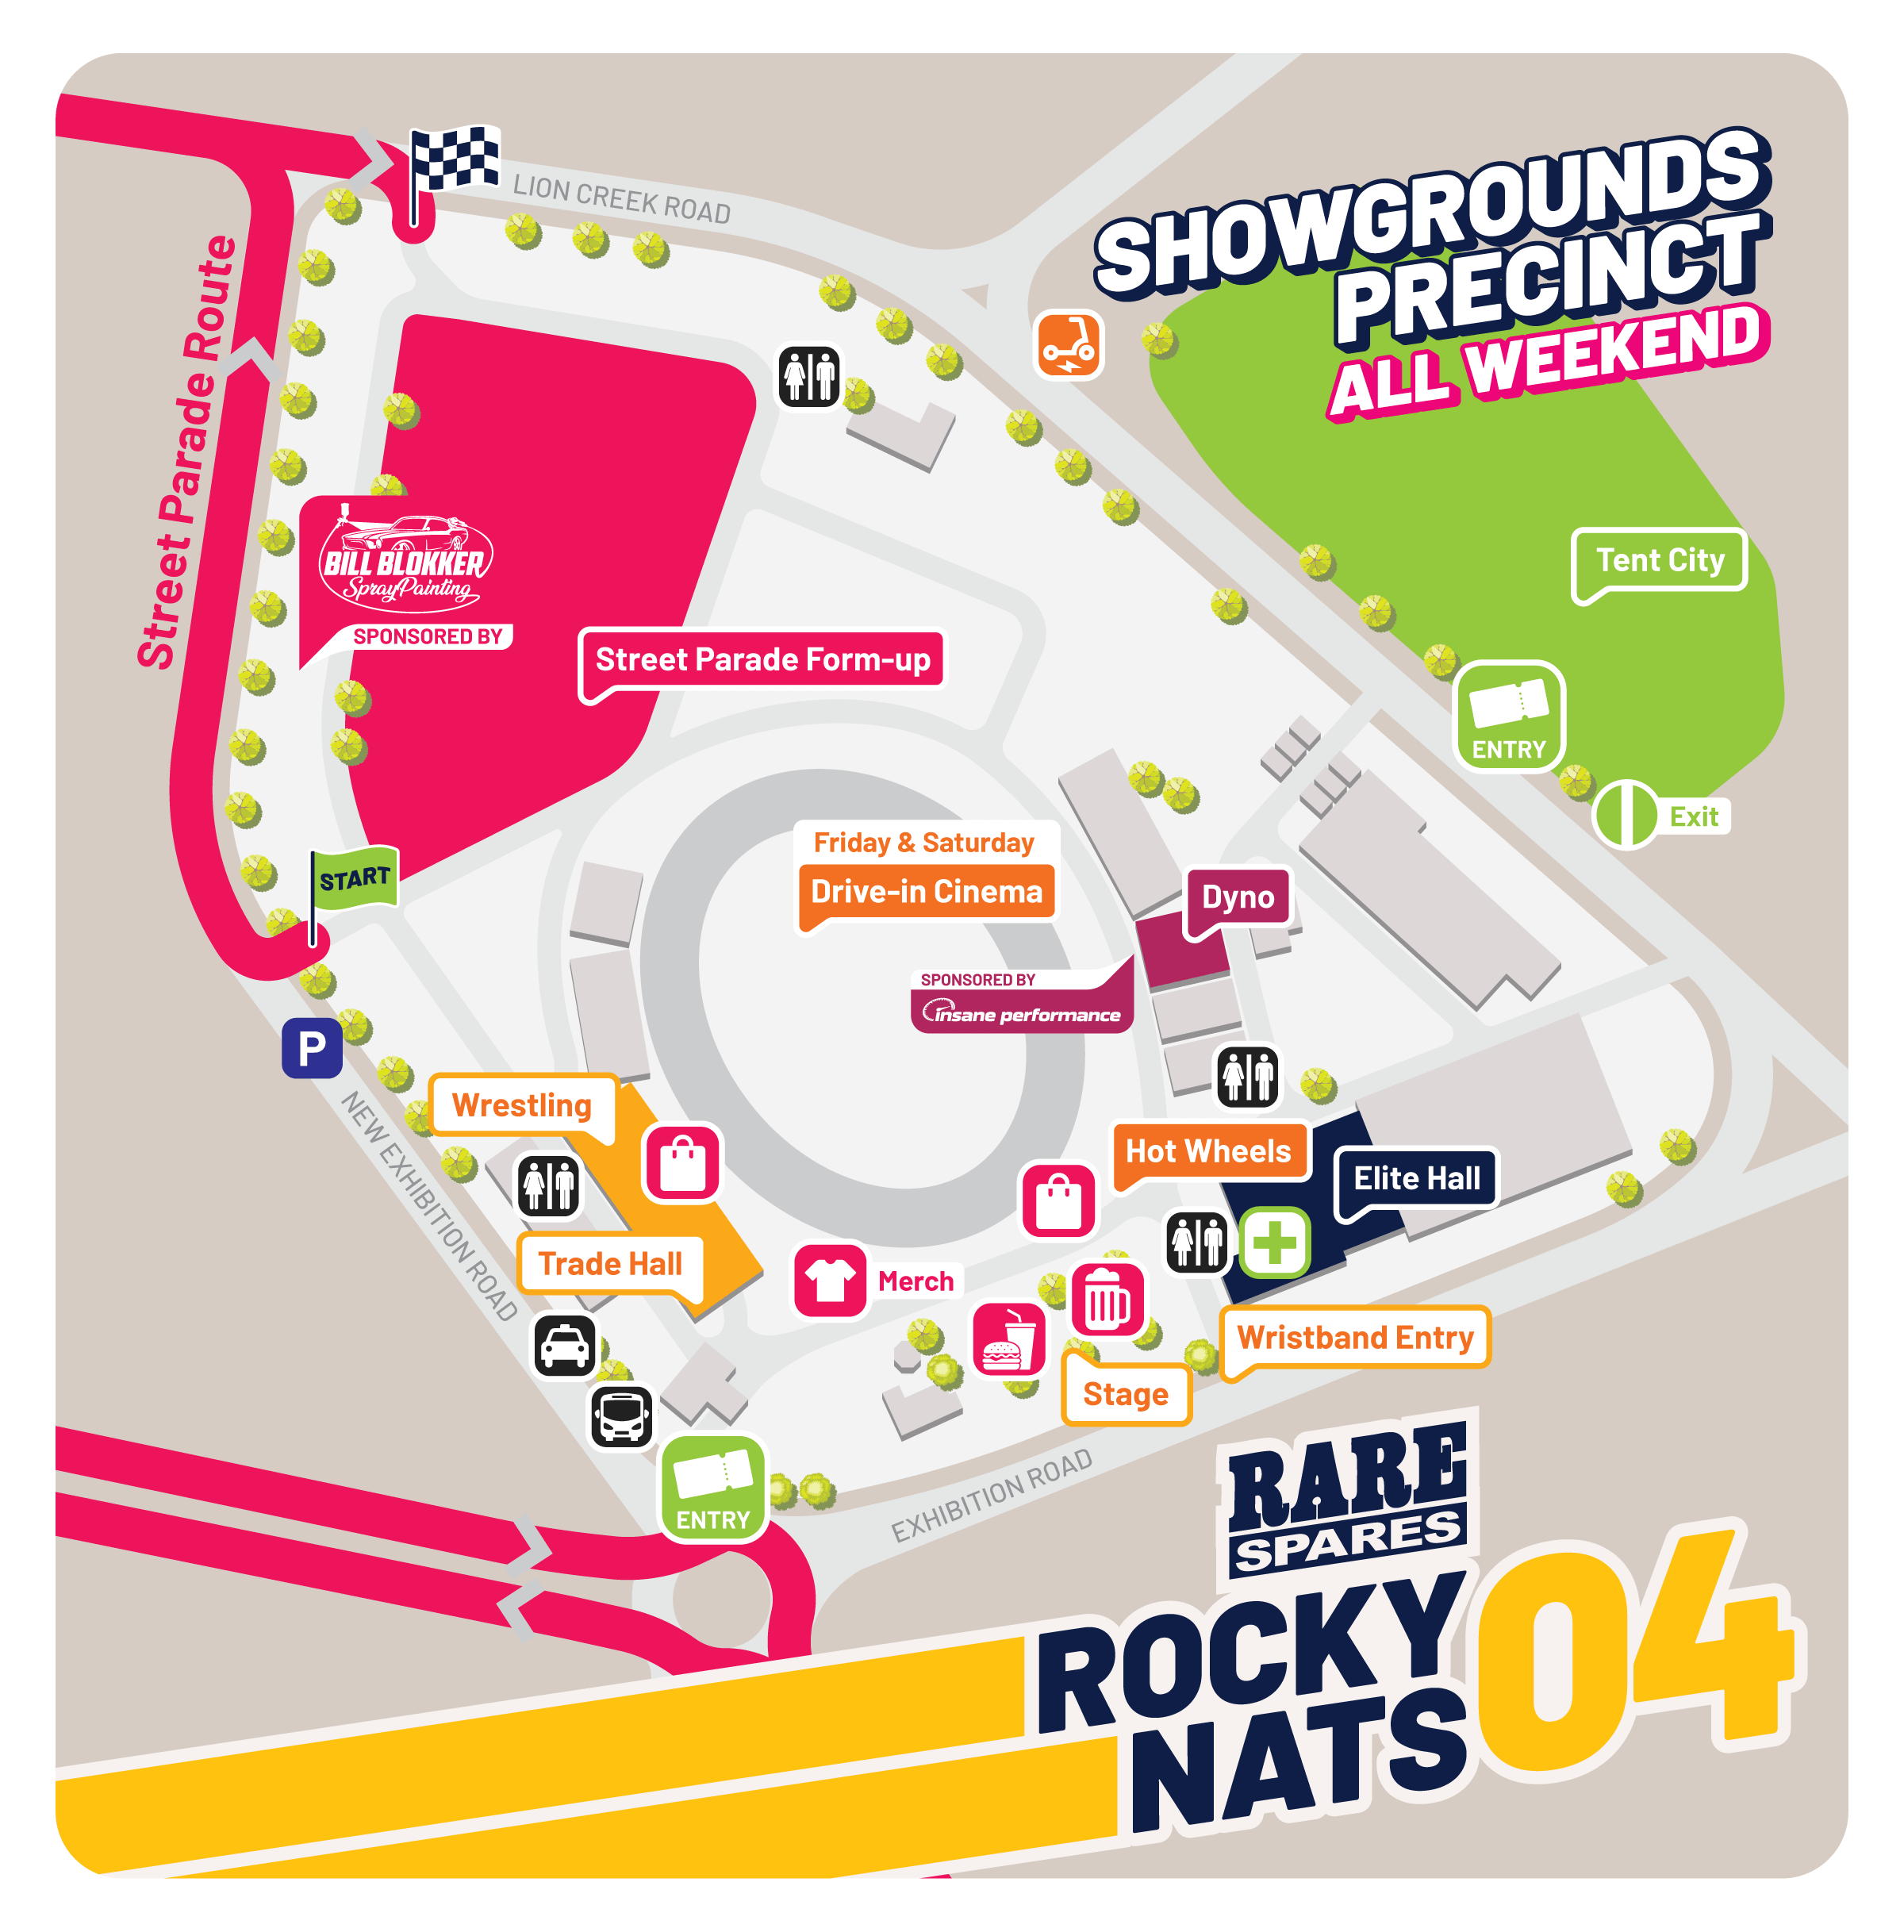 Rockynats 2023 Map - Showgrounds, Grass Driving, Elite Hall, Mack Trucks, Hot Wheels, Drive In, Main Stage, and Wrestling - Friday, Saturday and Sunday